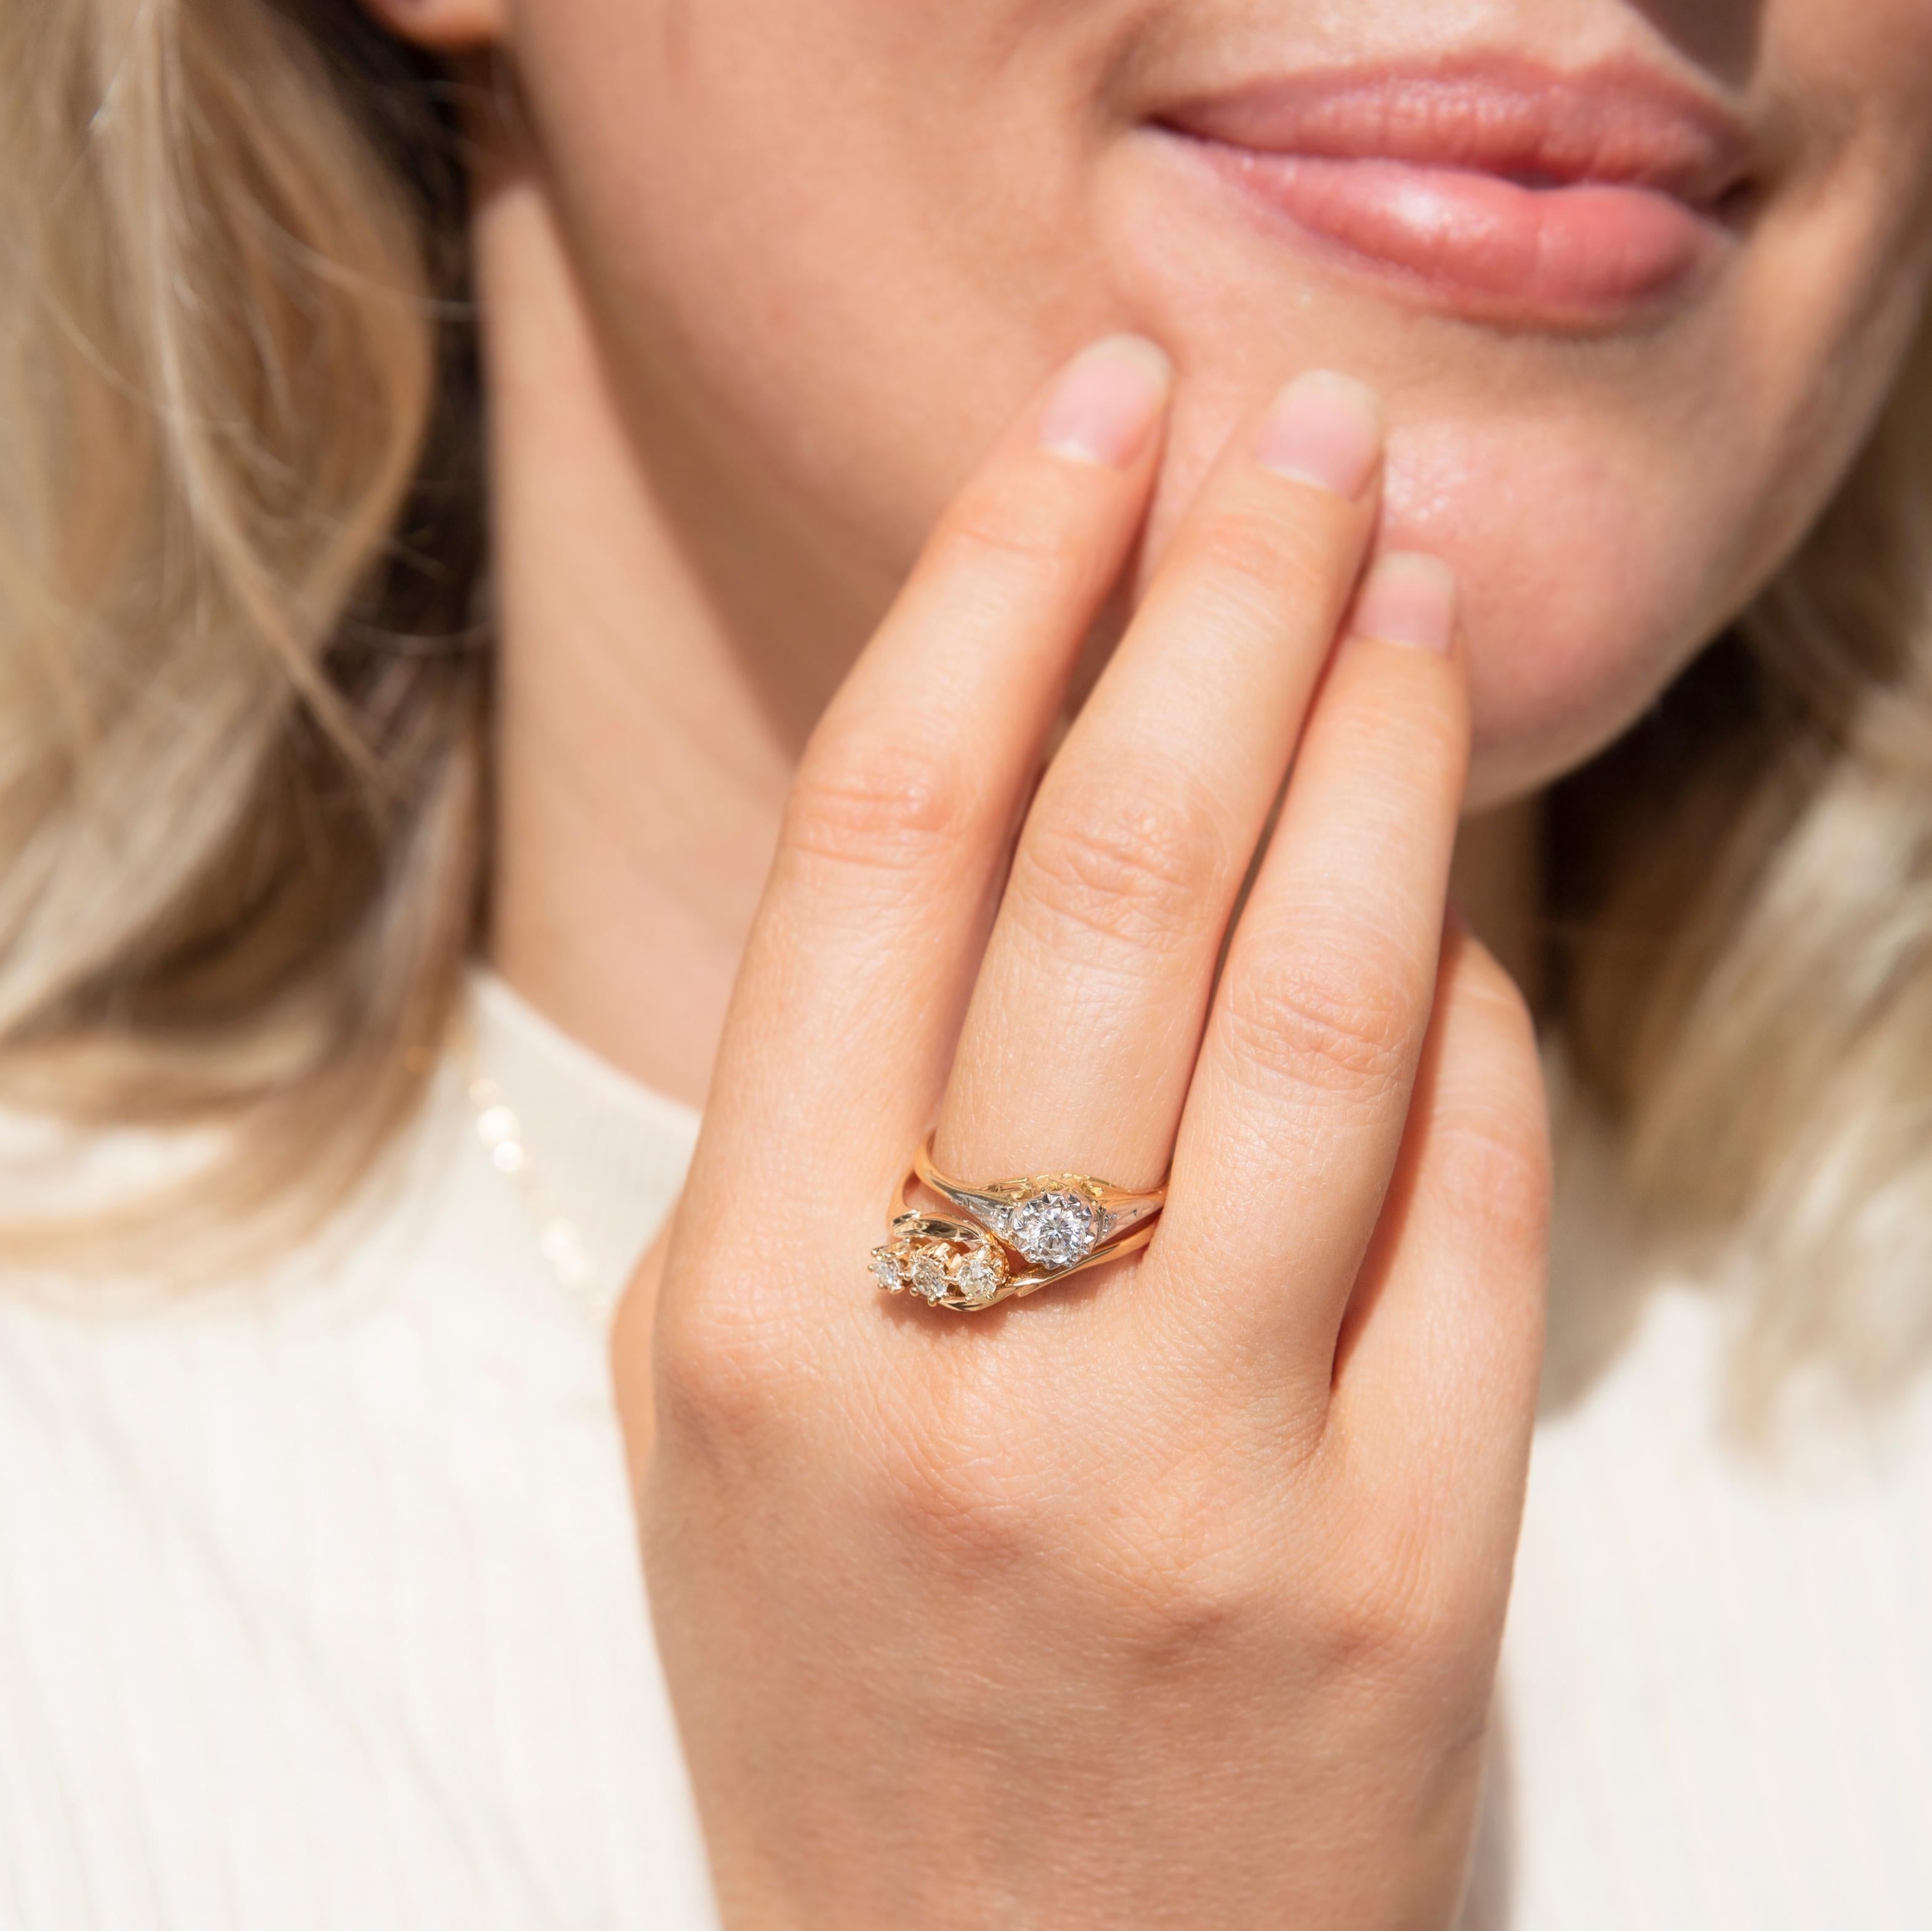 Crafted in 18 carat yellow gold, this lovely vintage ring, circa 1940s, features a shimmering trio of Old European Cut diamonds in a three-stone claw setting between swooping crossover shoulders. Her name is The Anyanka Ring. She imbues the wearer